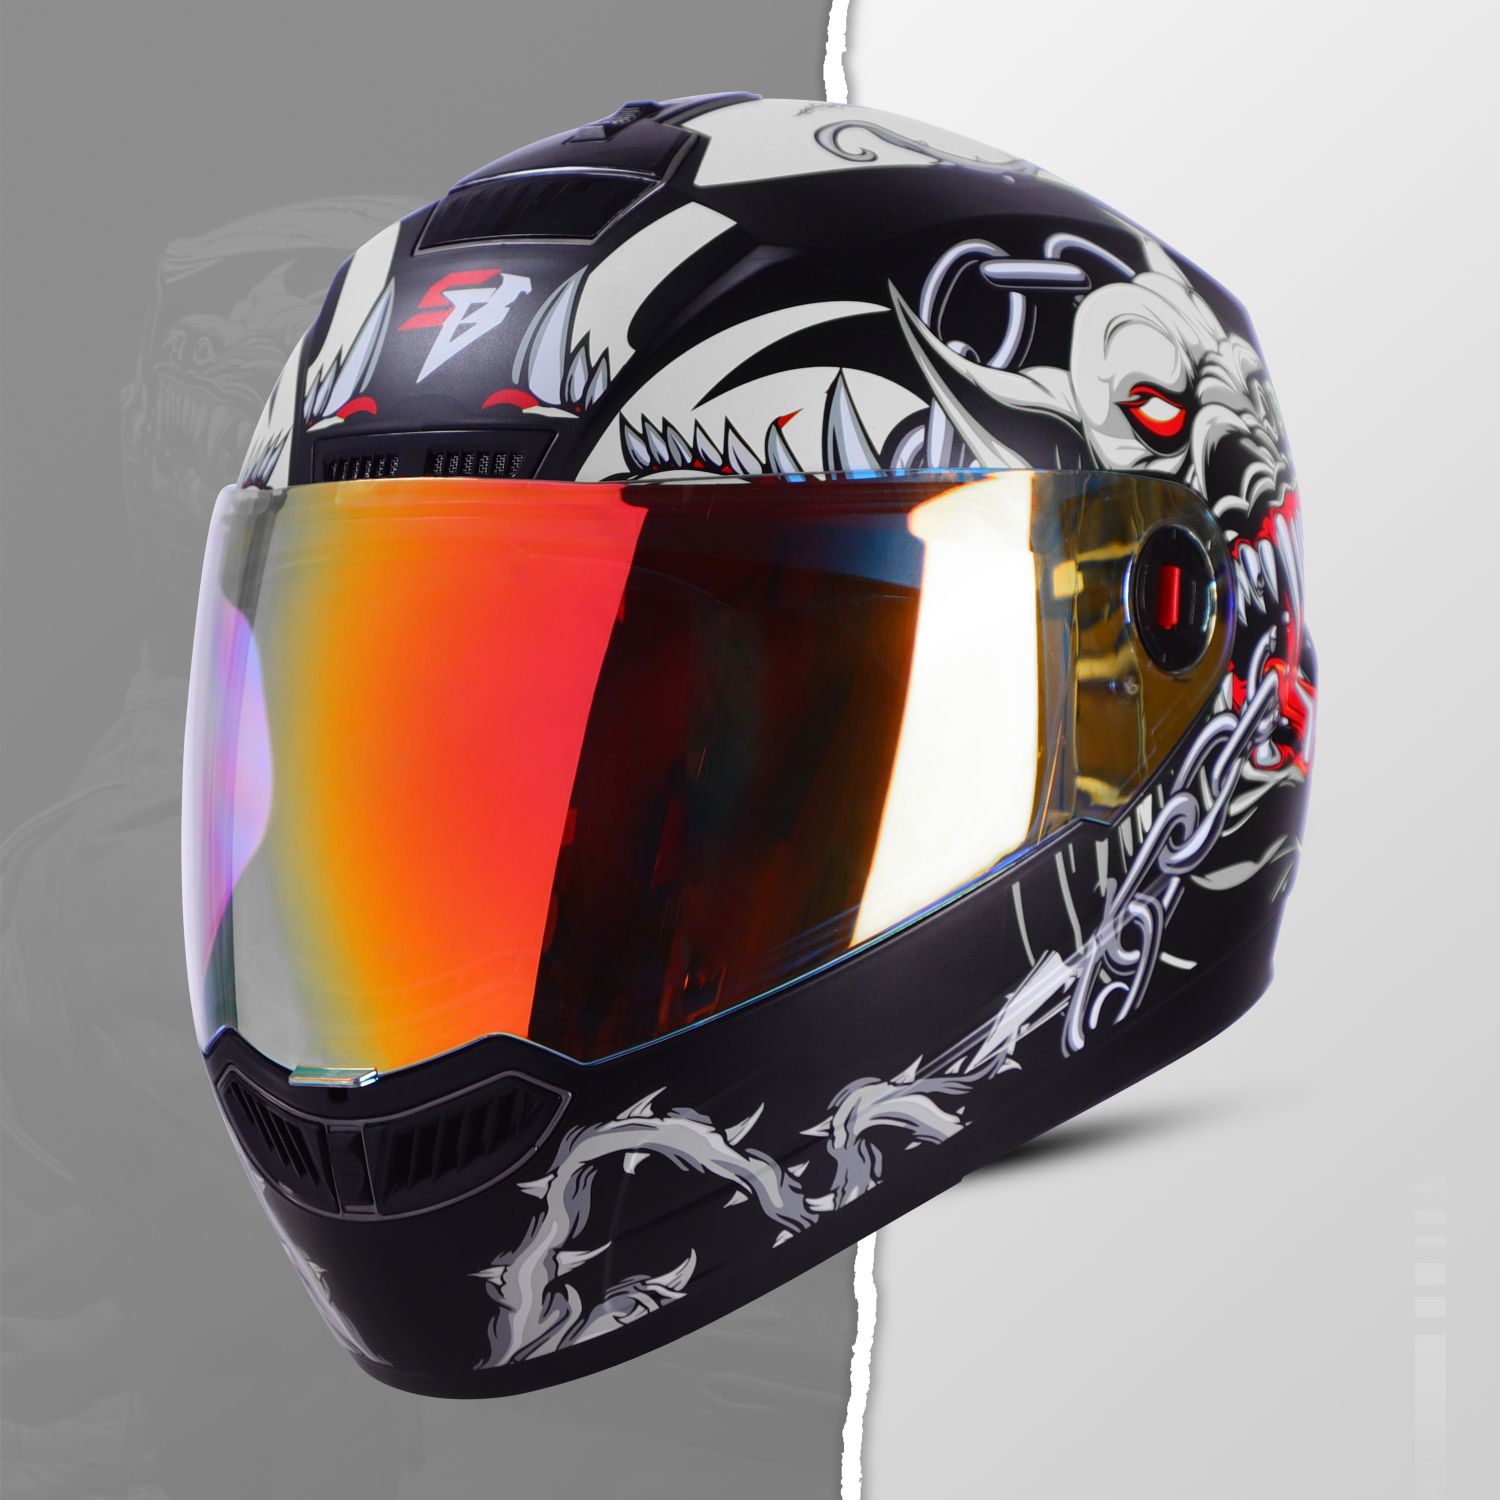 Steelbird SBA-1 Angry Dog ISI Certified Full Face Graphic Helmet For Men And Women (Glossy Black Grey With Night Vision Gold Visor)